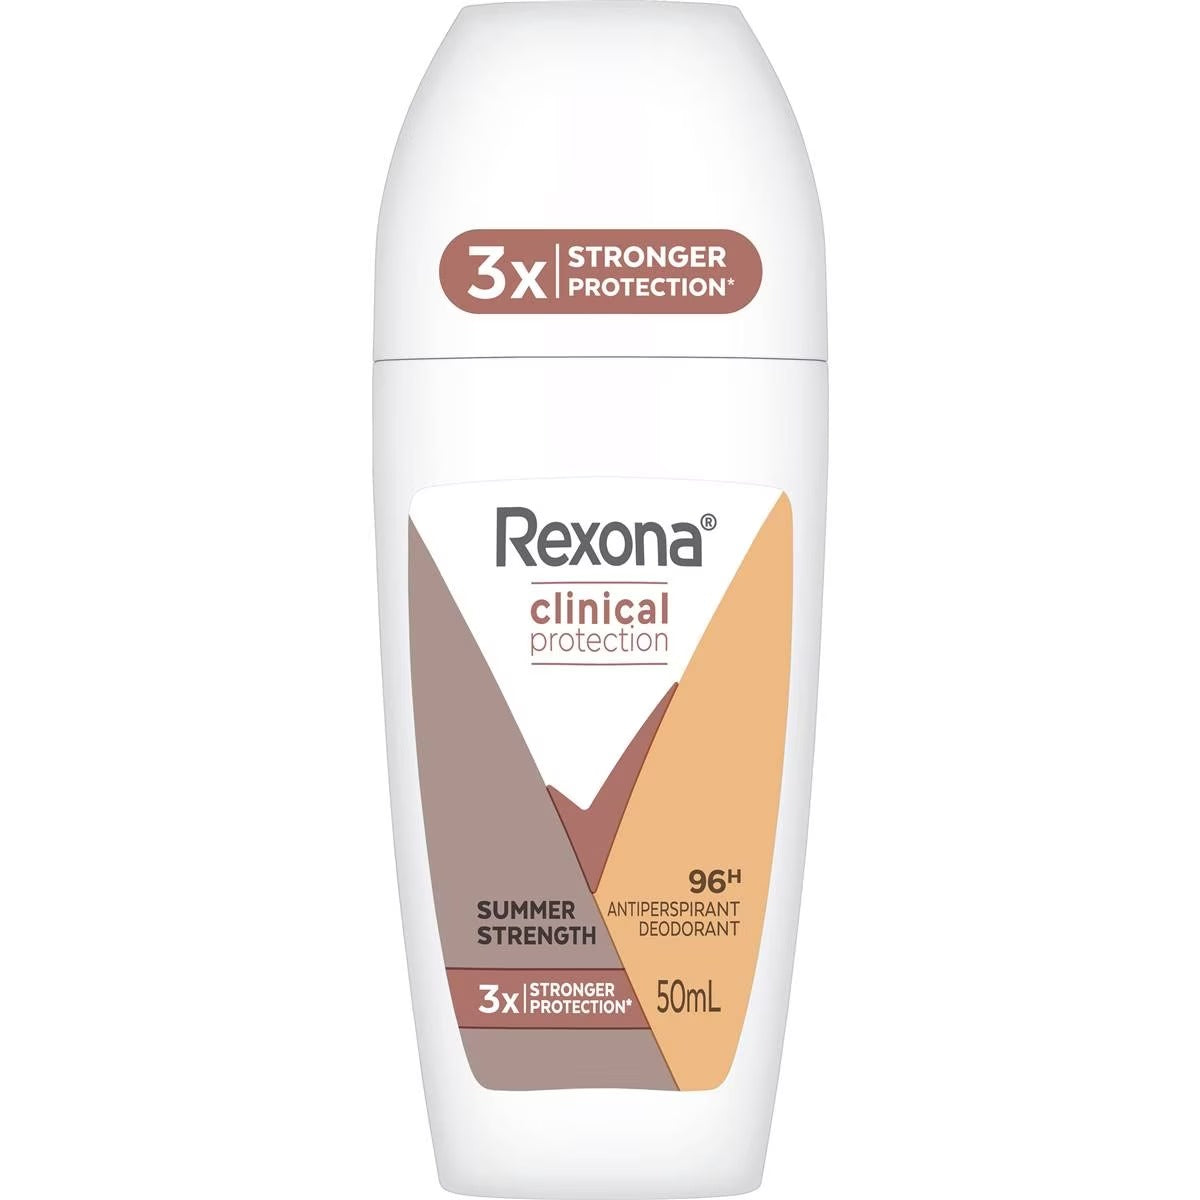 Rexona - FOR EXCESSIVE SWEATING, Use New Rexona Clinical